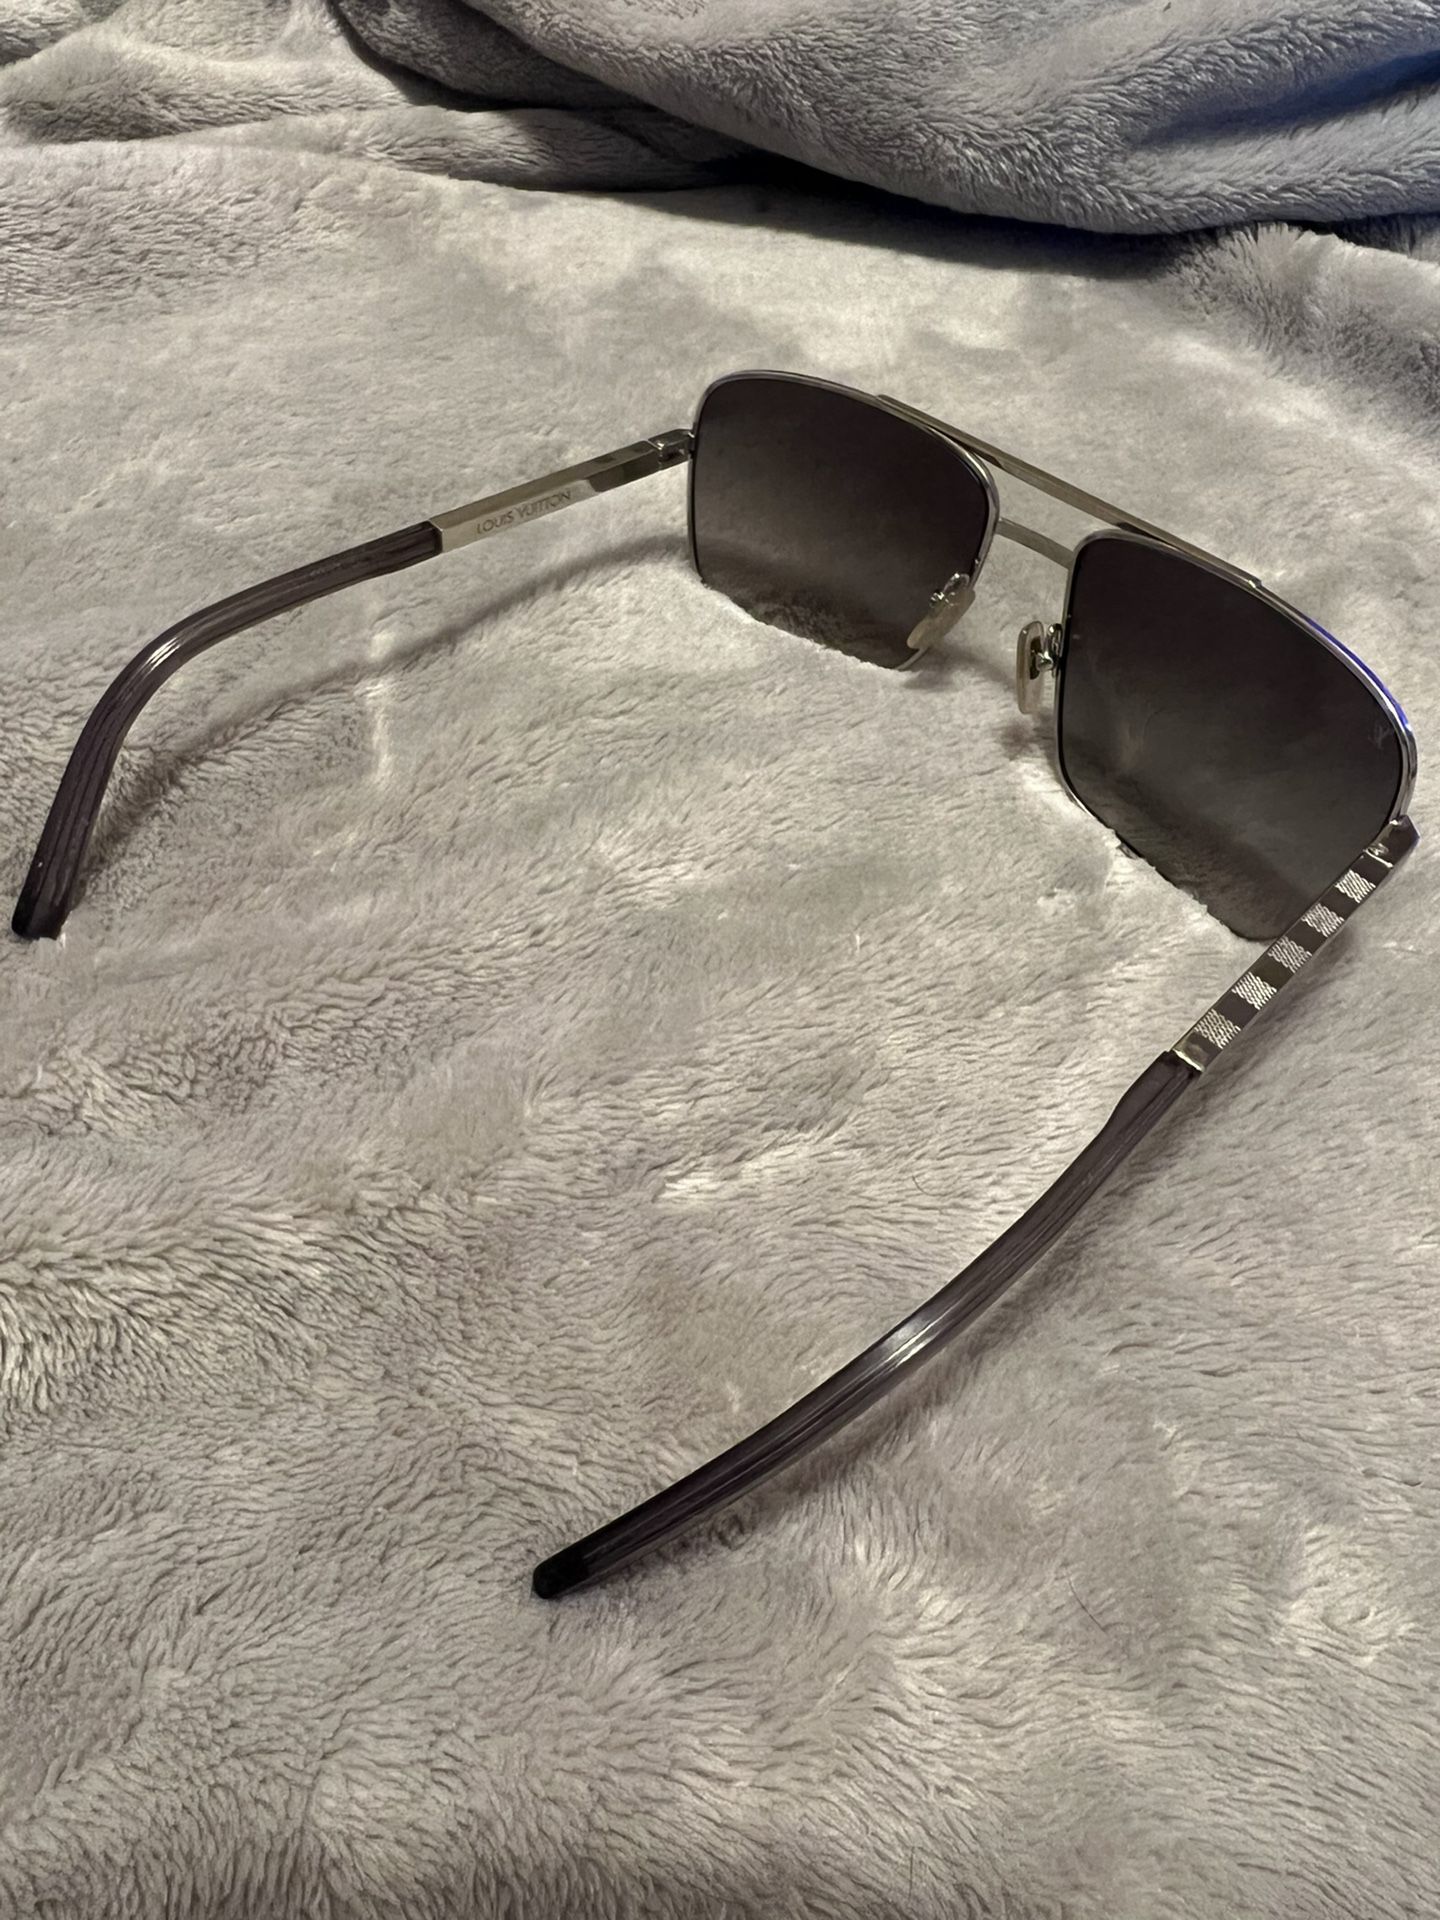 Louis Vuitton Twister Azur Sunglasses for Sale in Canyon Country, CA -  OfferUp